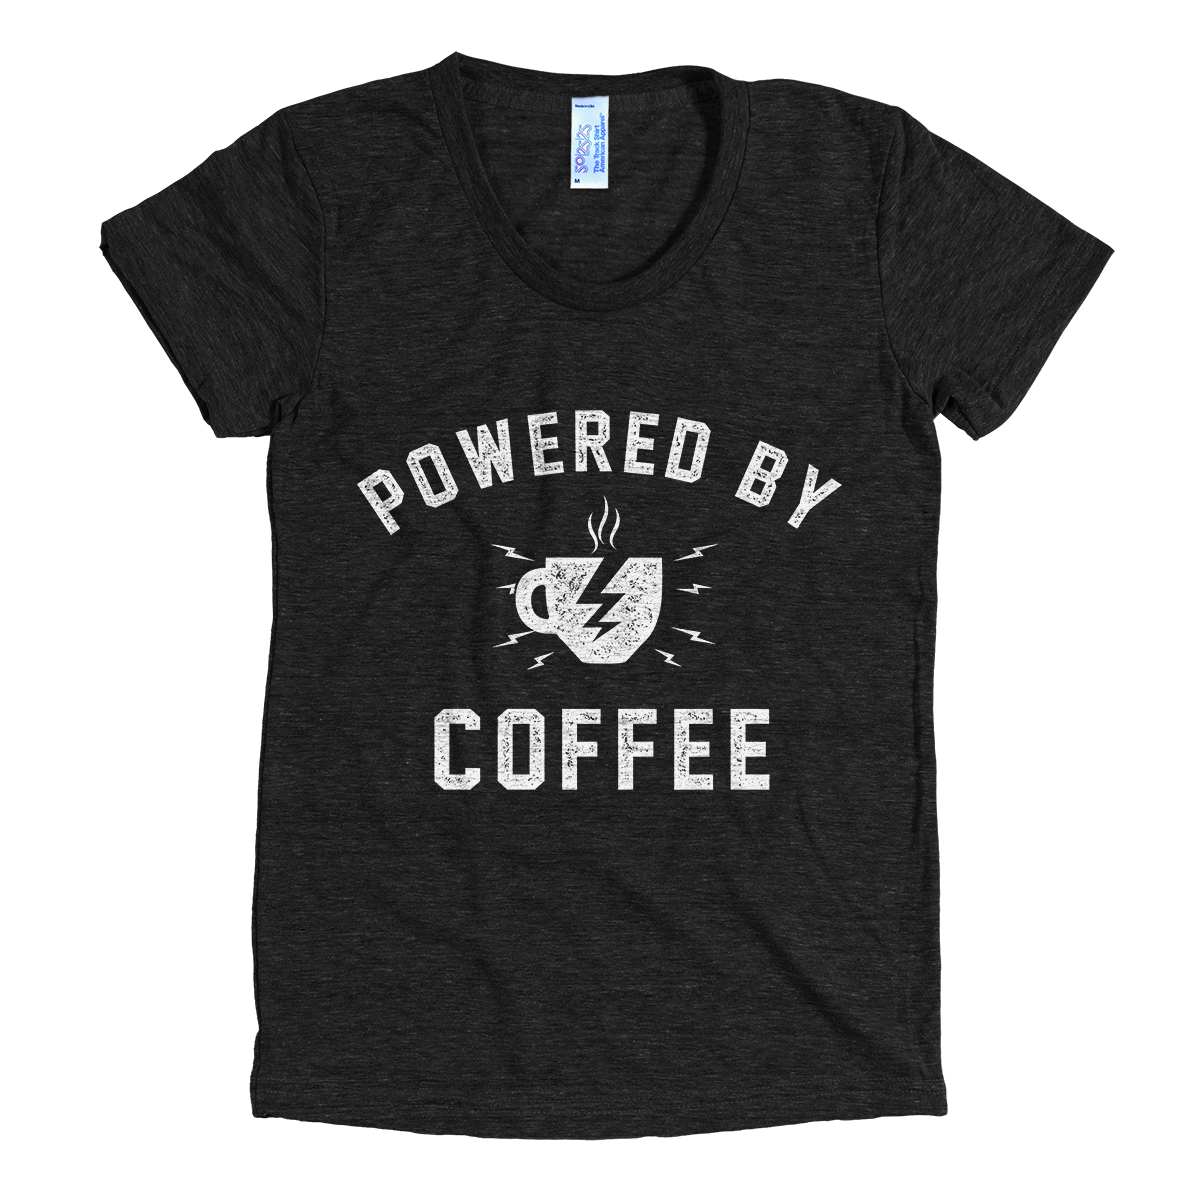 Powered by Coffee t-Shirt